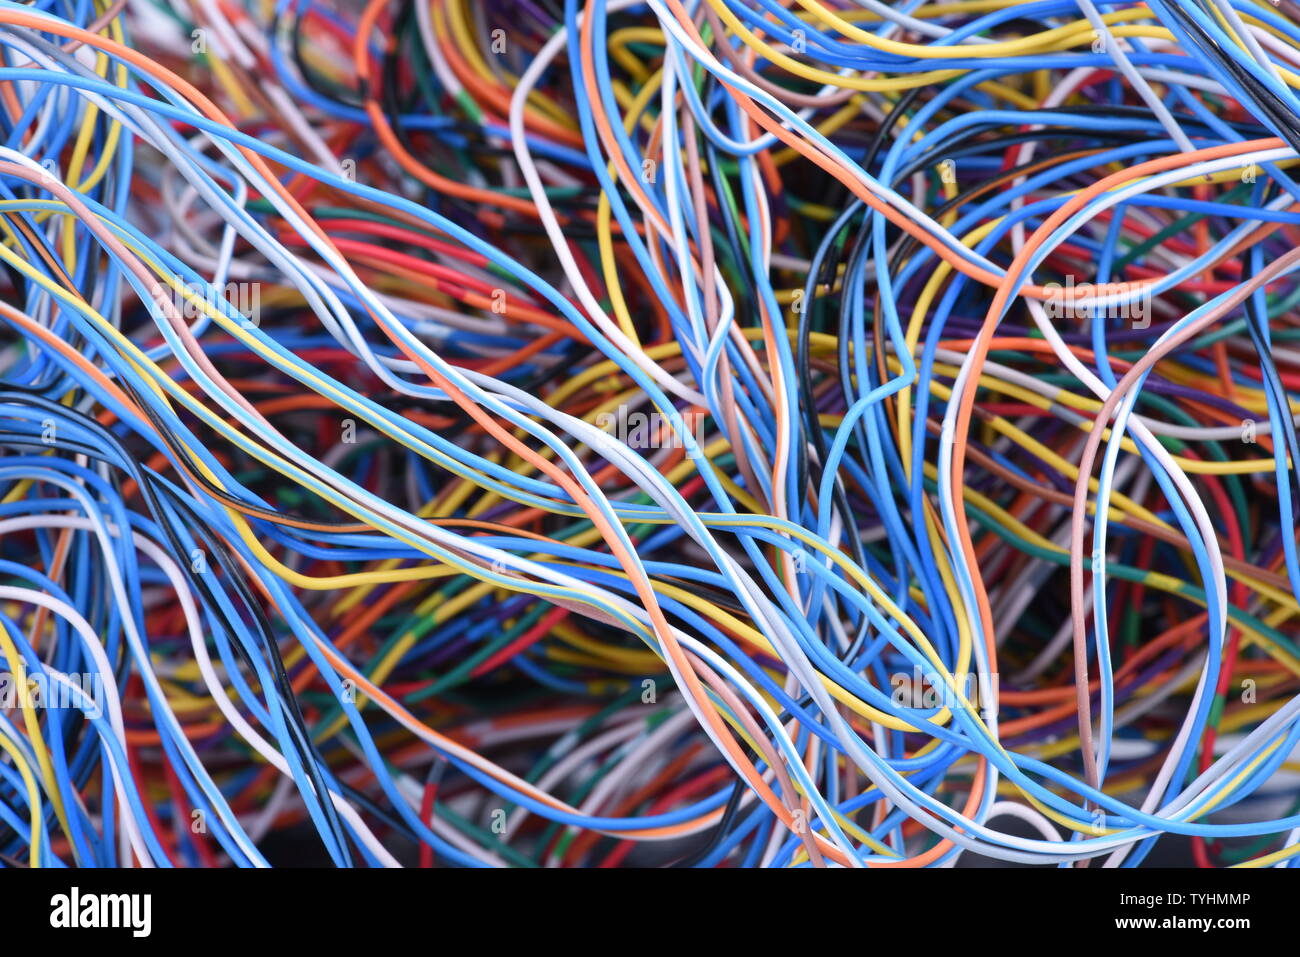 Chaos of electrical wire and cable Stock Photo